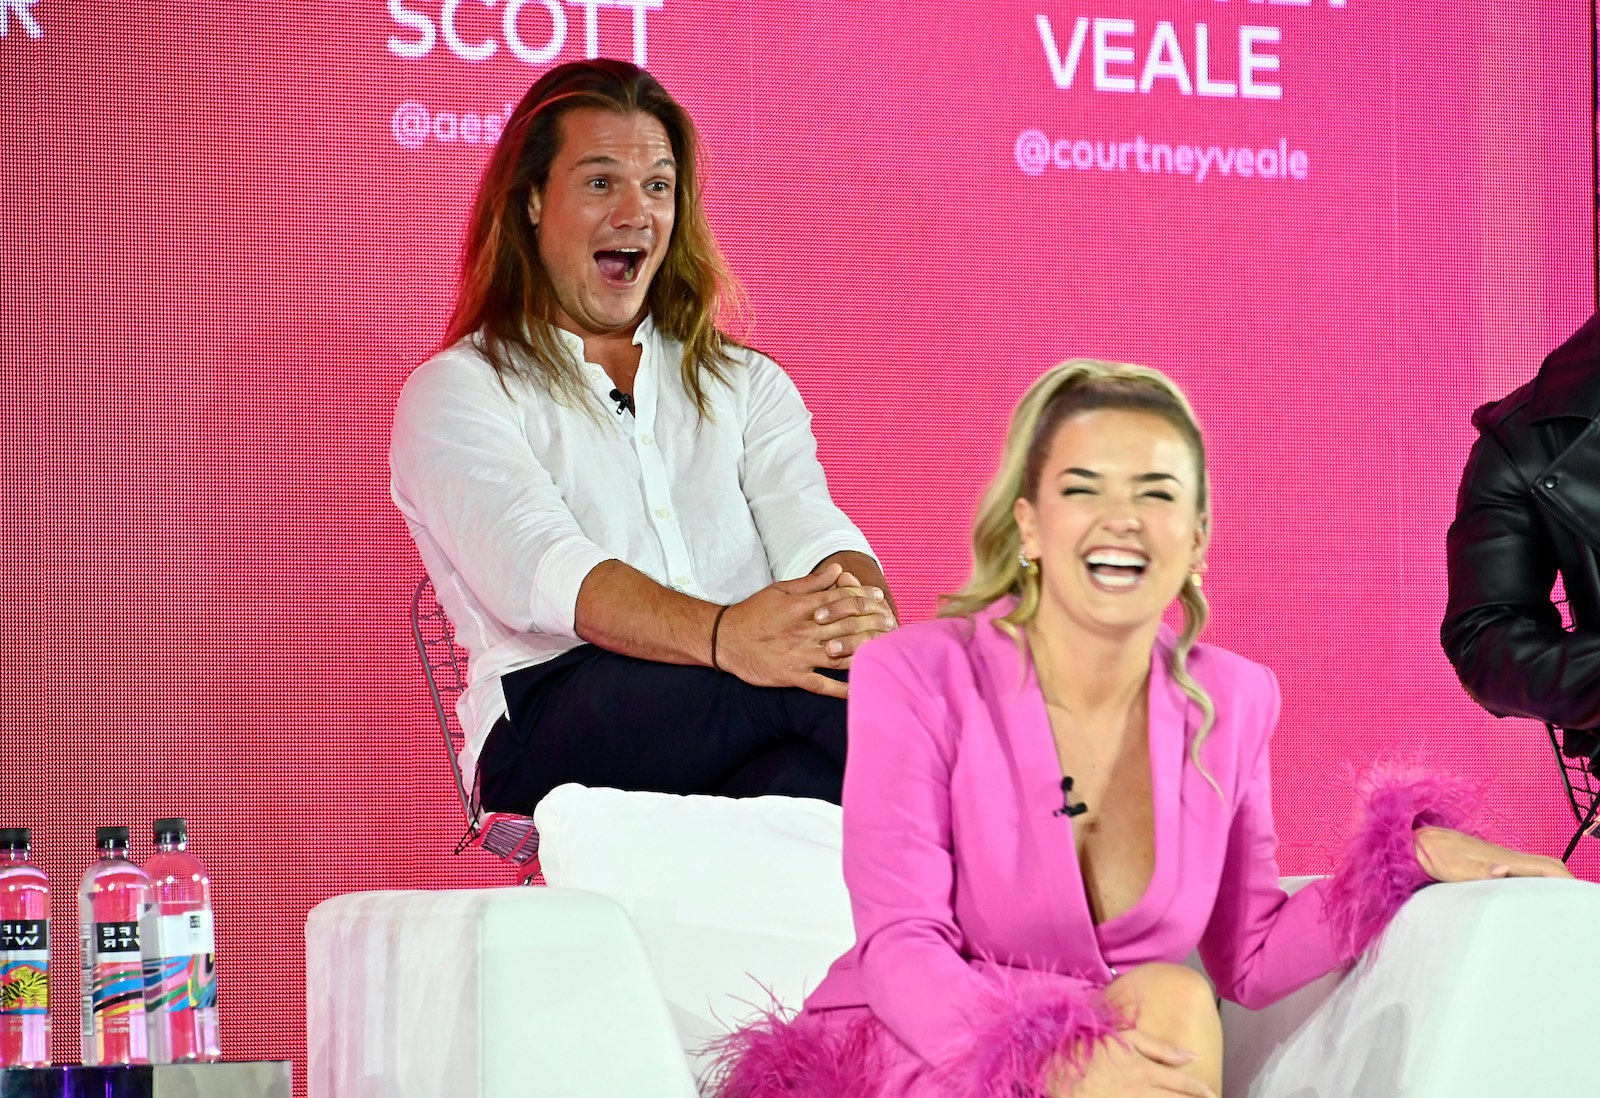 Gary King from 'Below Deck Sailing Yacht' sits behind Daisy Kelliher looking surprised as she laughs at BravoCon